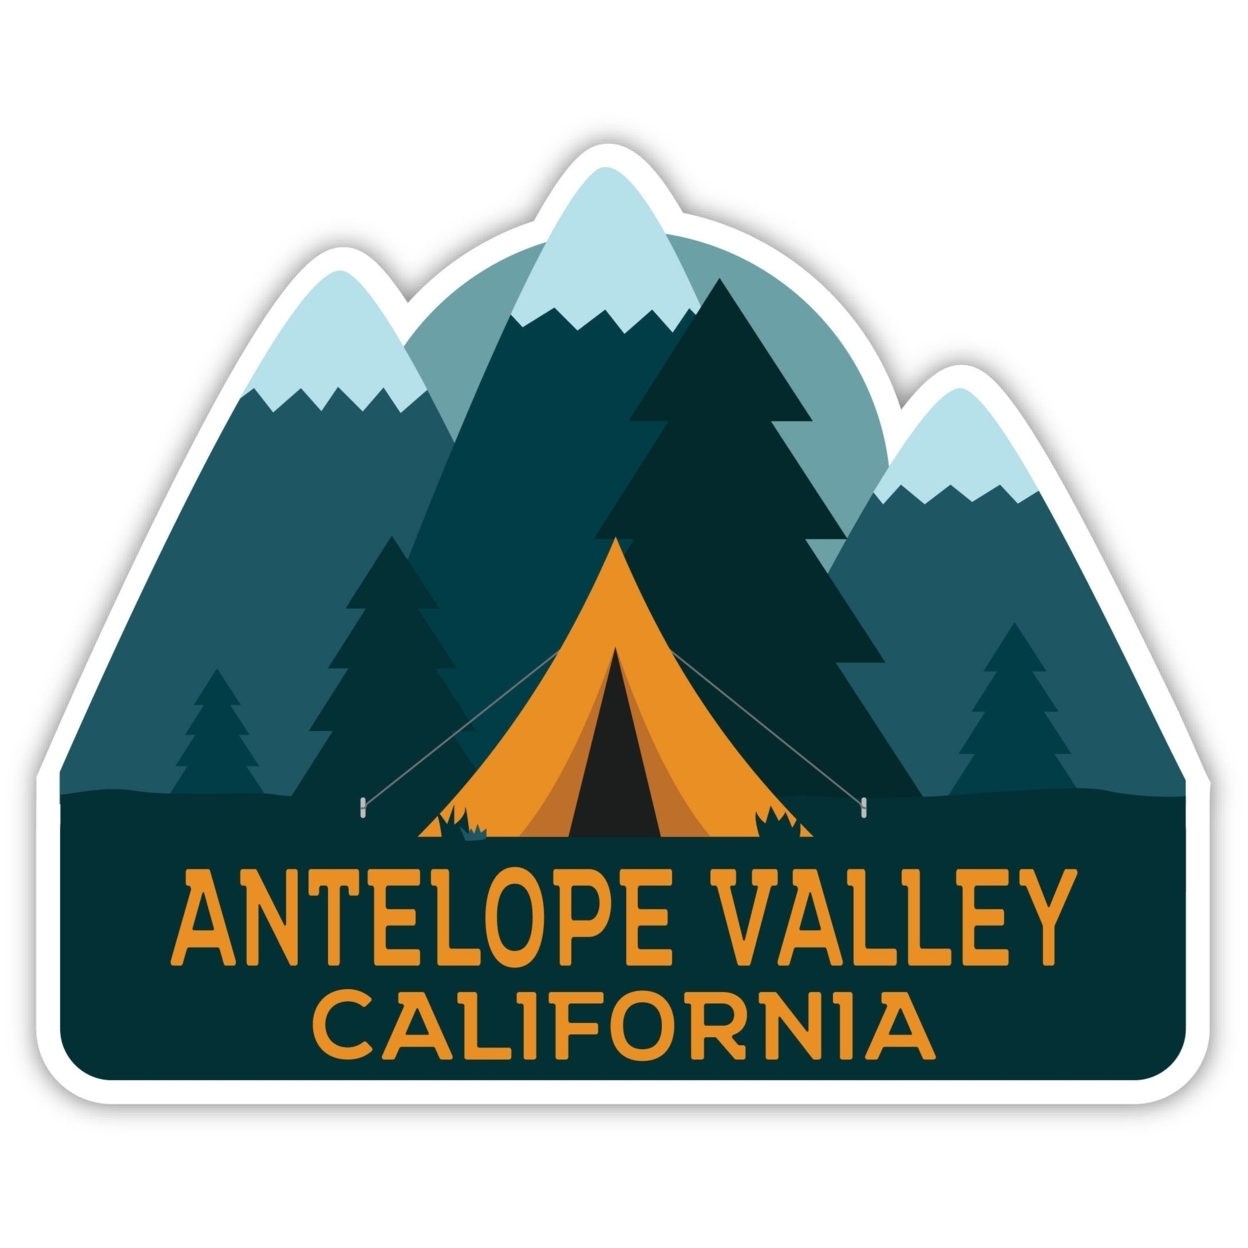 Antelope Valley California Souvenir Decorative Stickers (Choose Theme And Size) - 4-Pack, 6-Inch, Tent